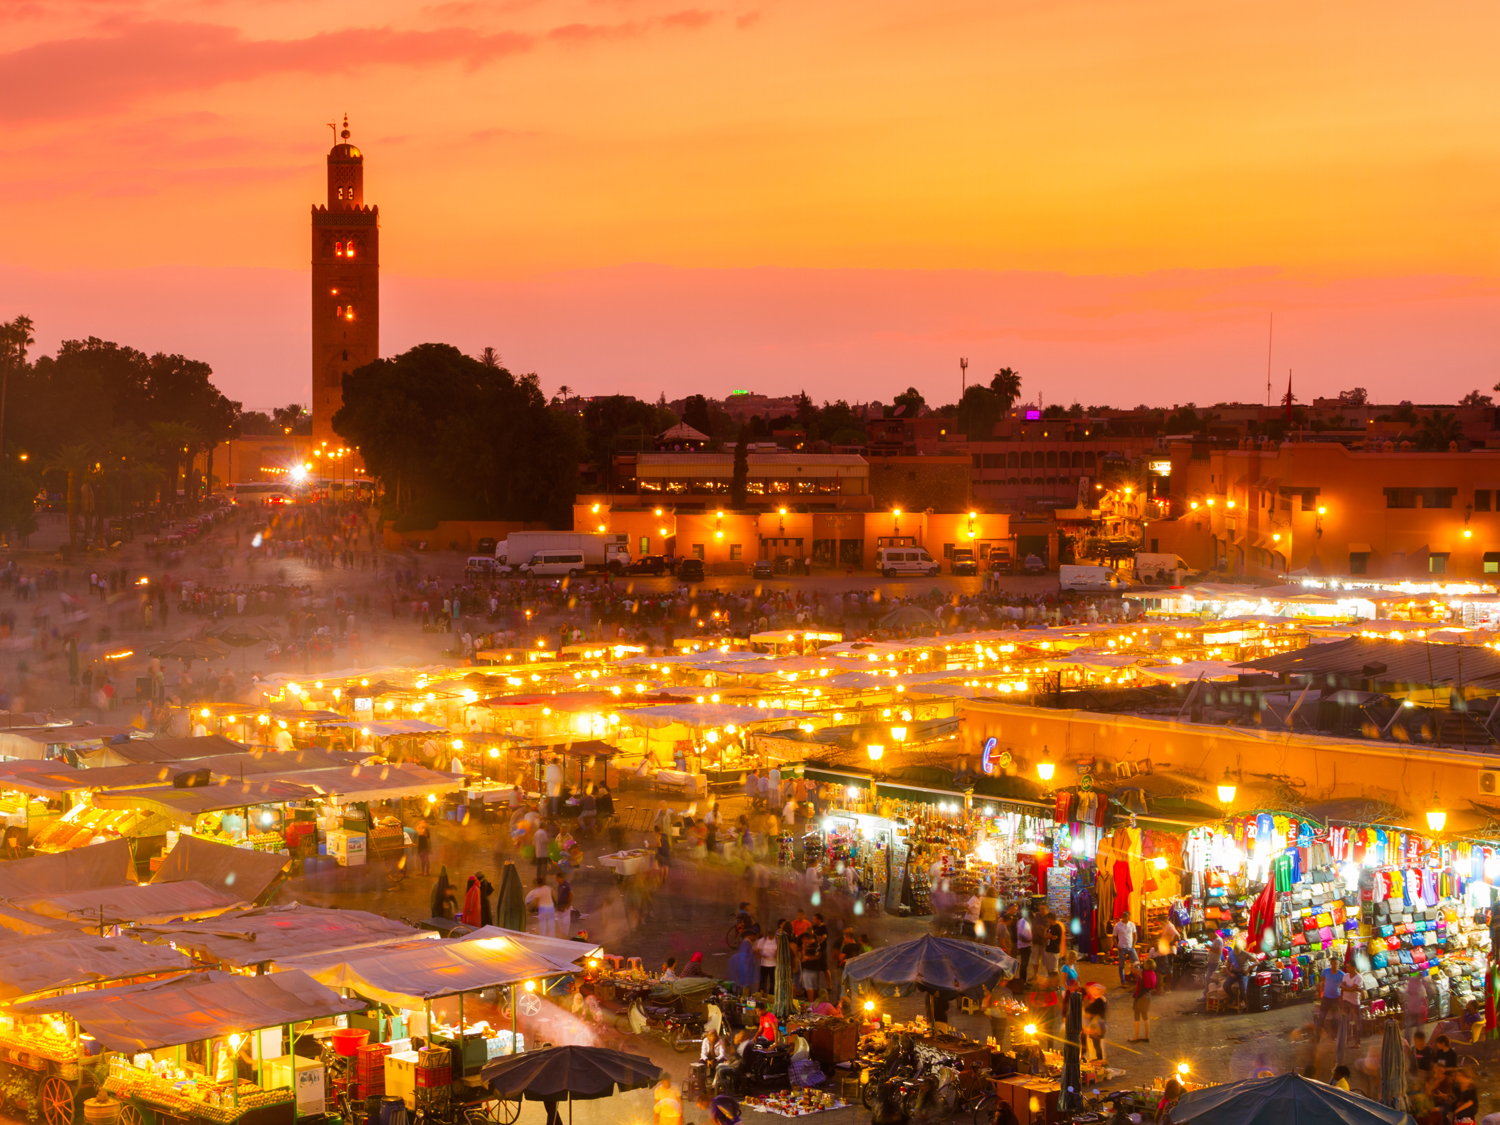 The skyline of Marrakech at sunset with the Koutoubia Mosque in the top left